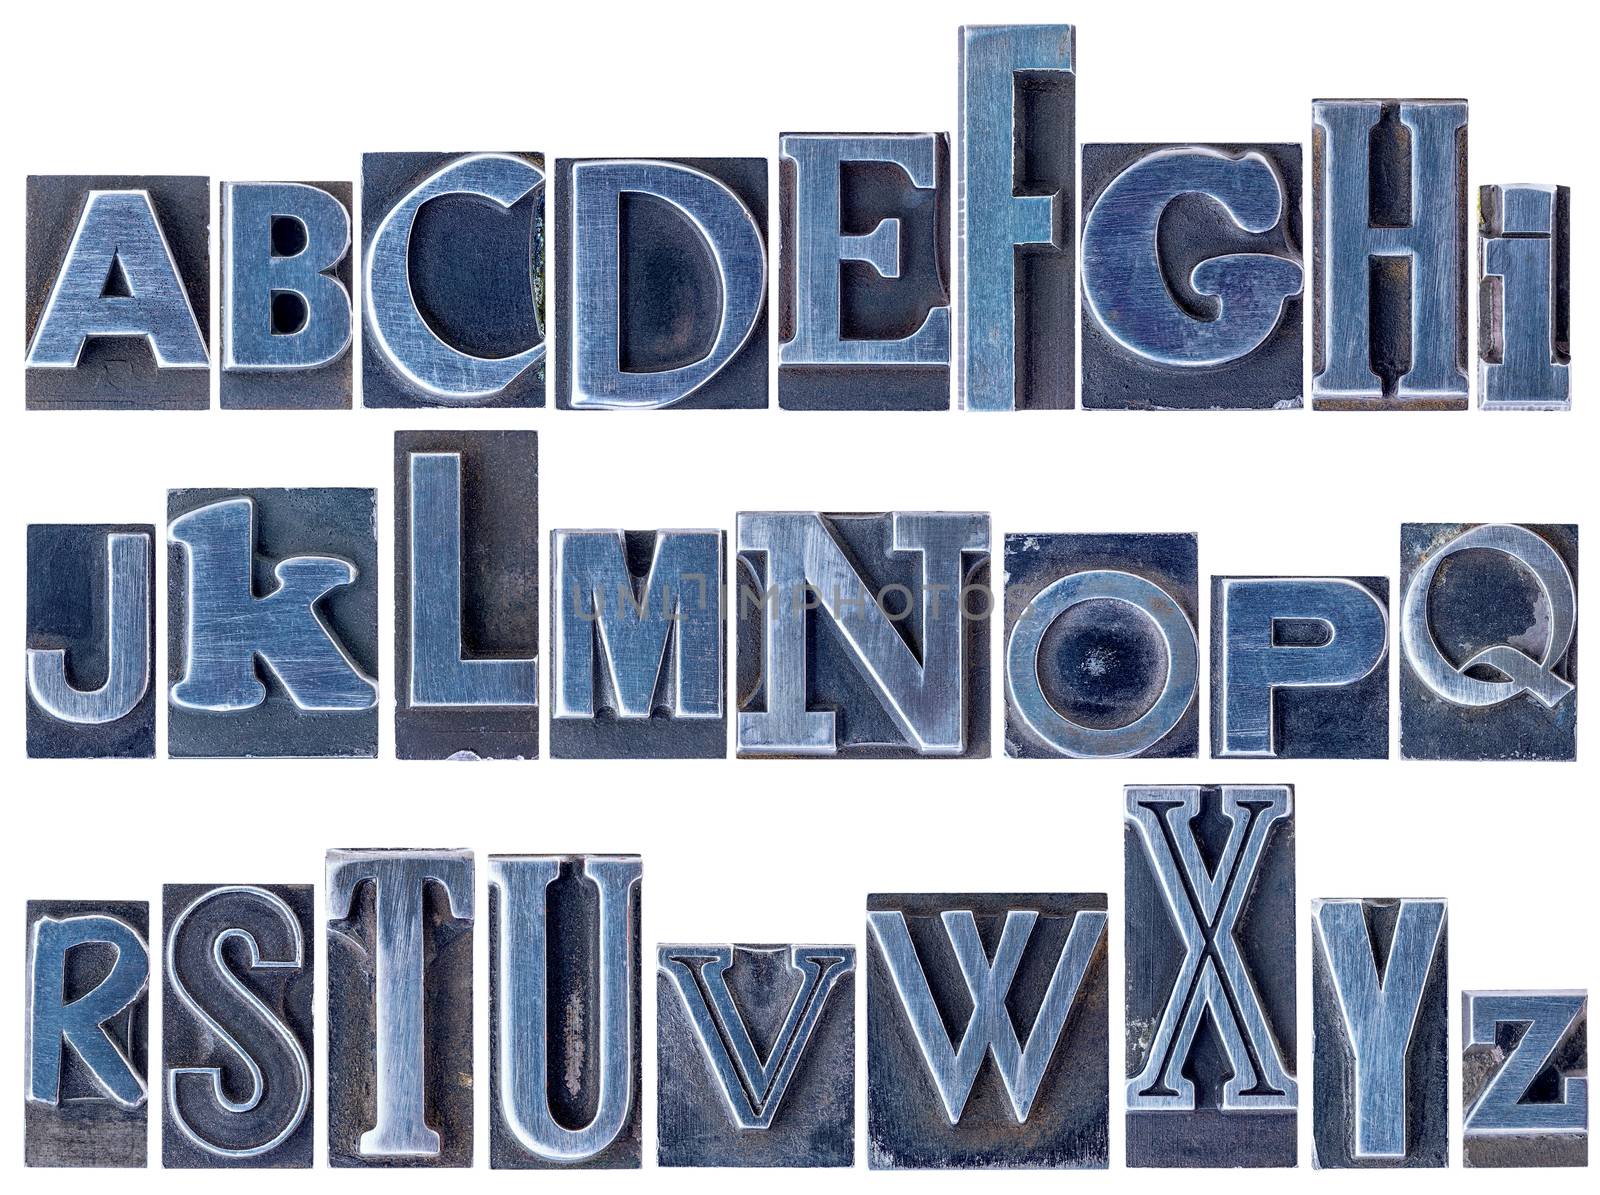 English alphabet - a collage of 26 isolated letters in letterpress metal type printing blocks, a variety of mixed fonts stained by blue ink